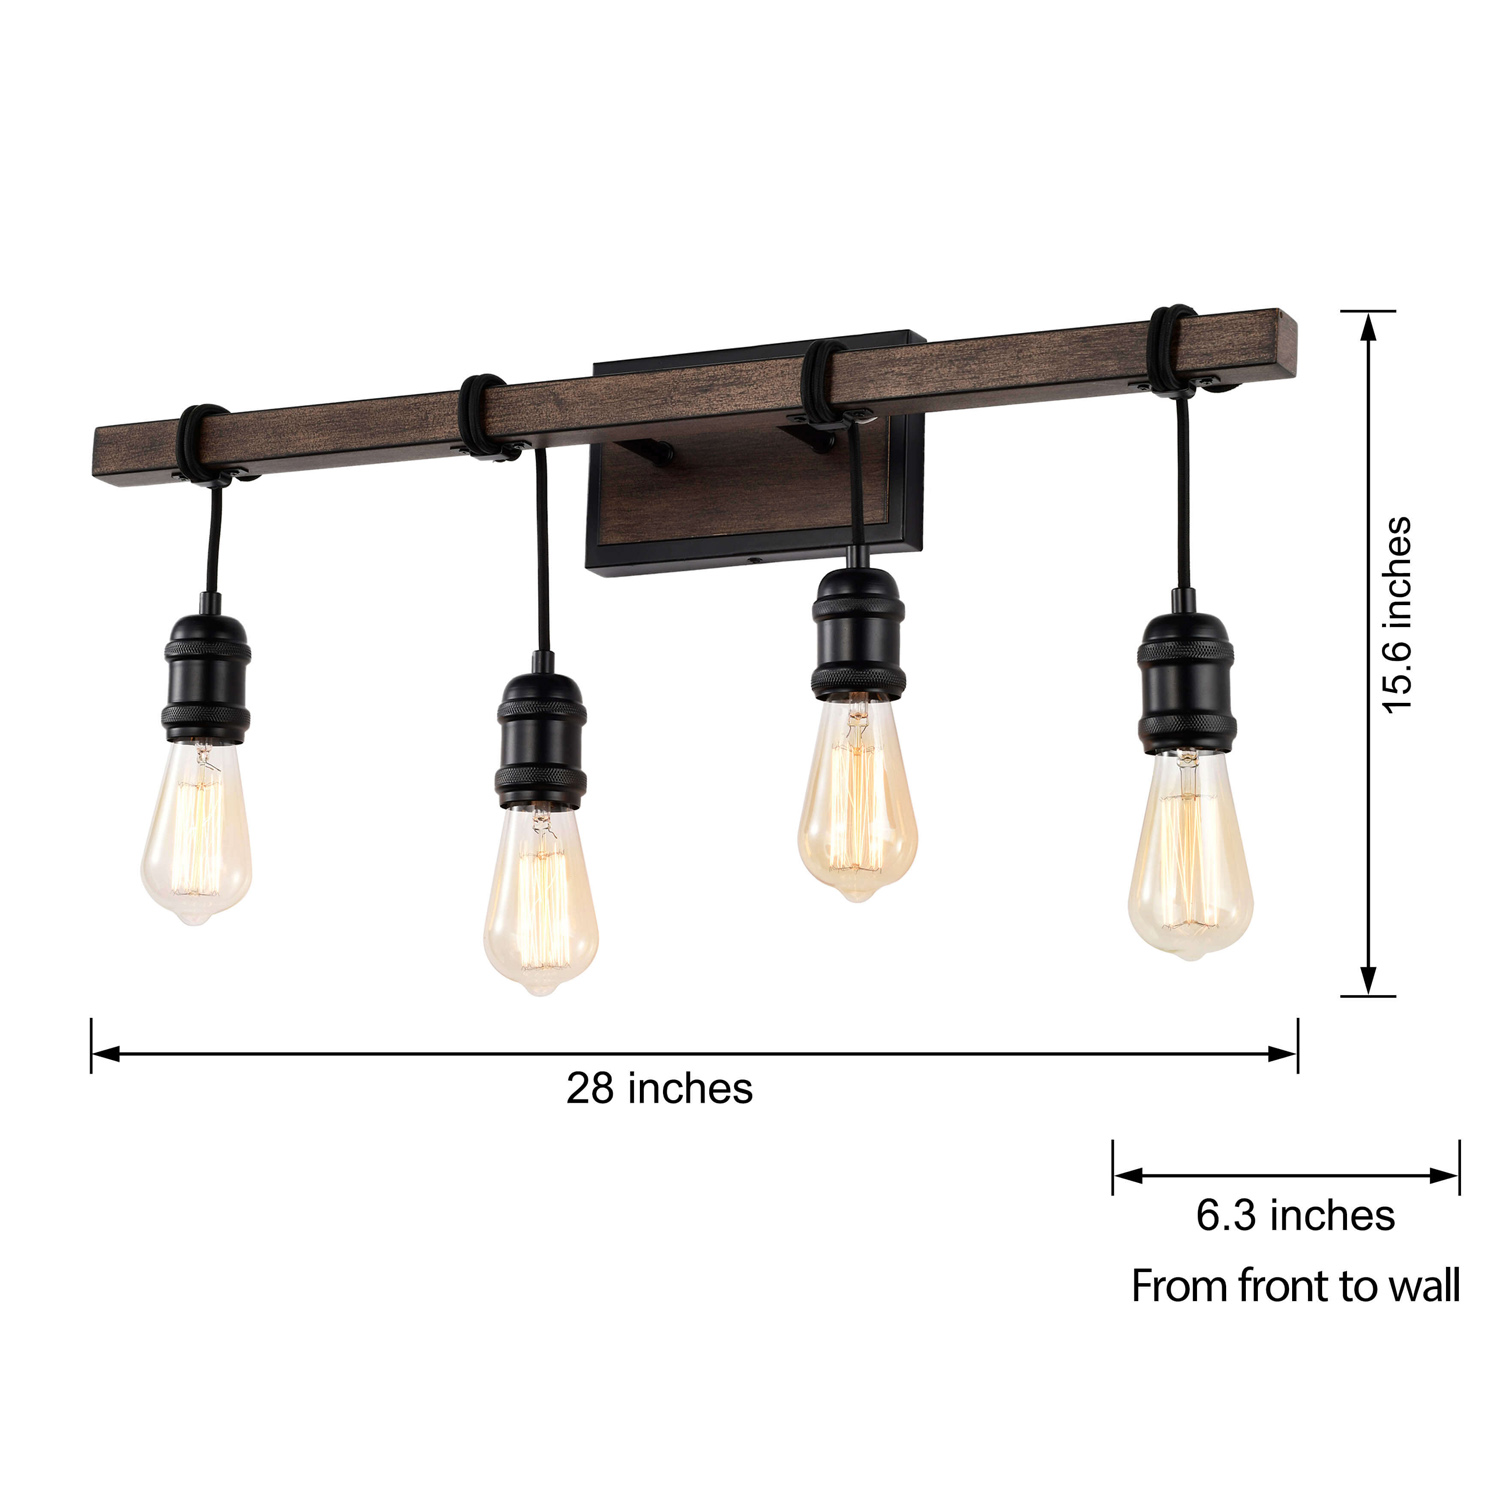 Betisa 4-light Antique Black and Faux Wood Grain Finish Wall Sconce LJ-6251-EWL